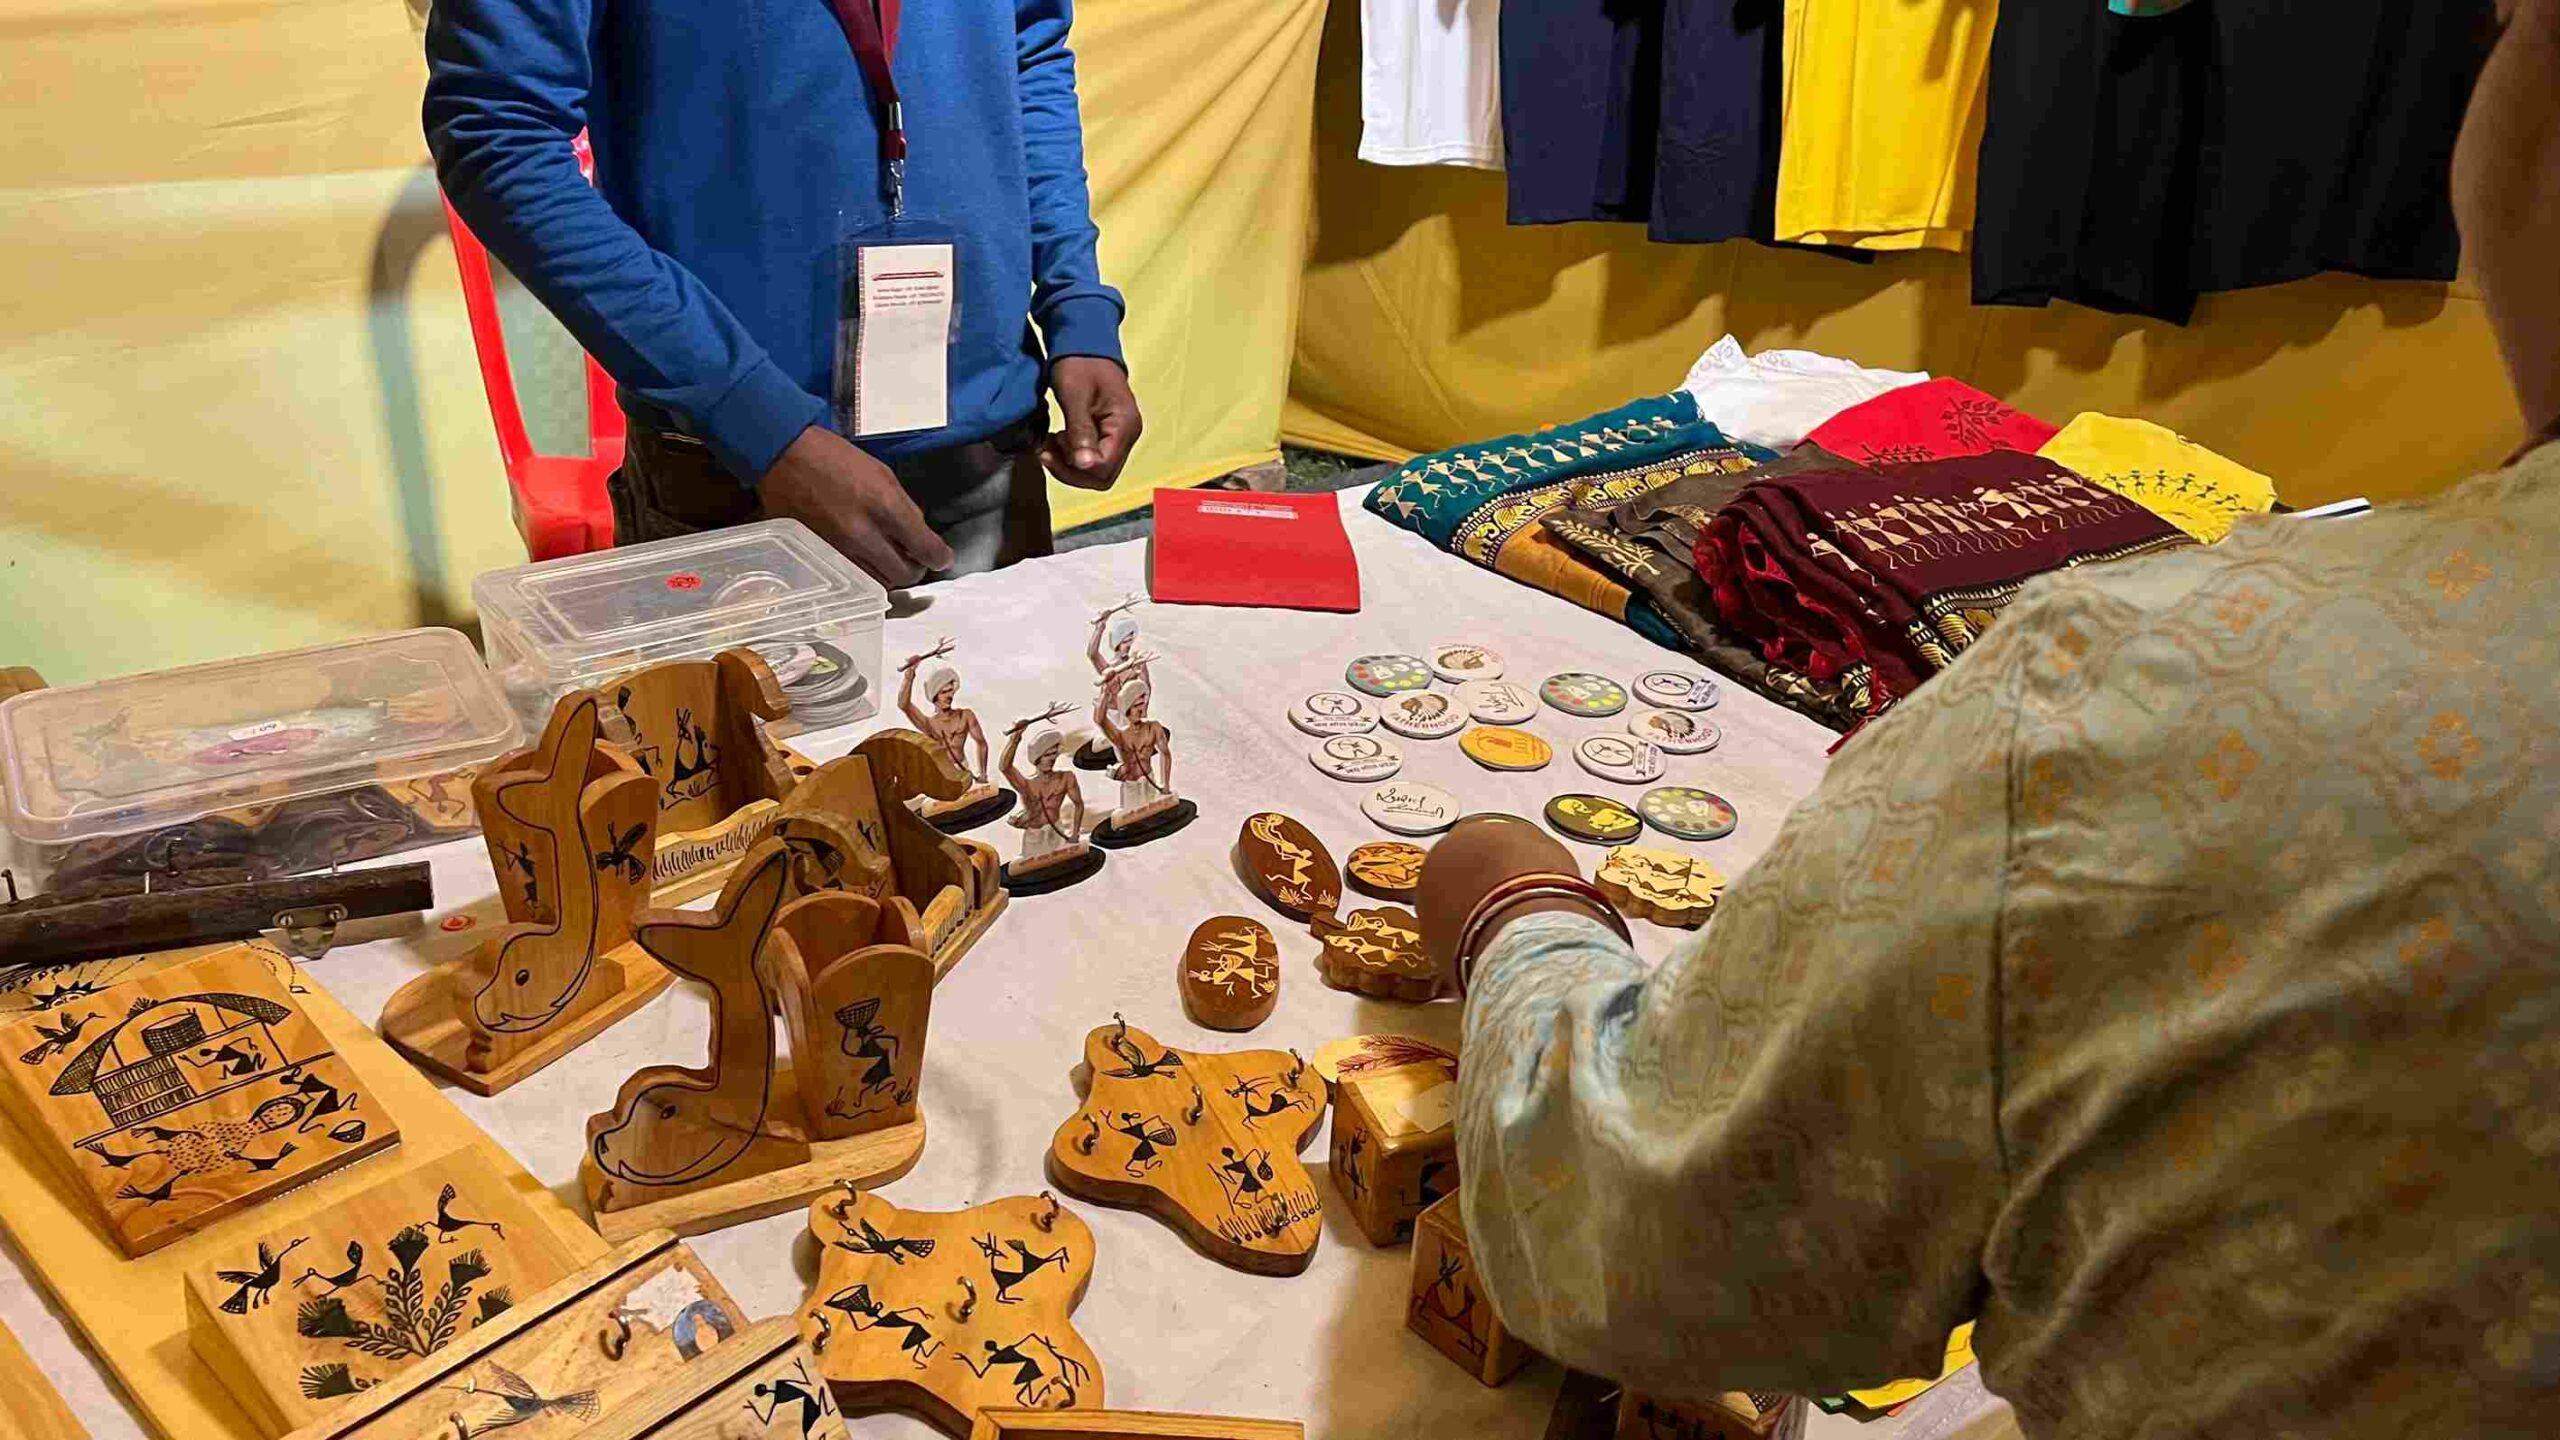 A stall displaying products featuring Warli art.